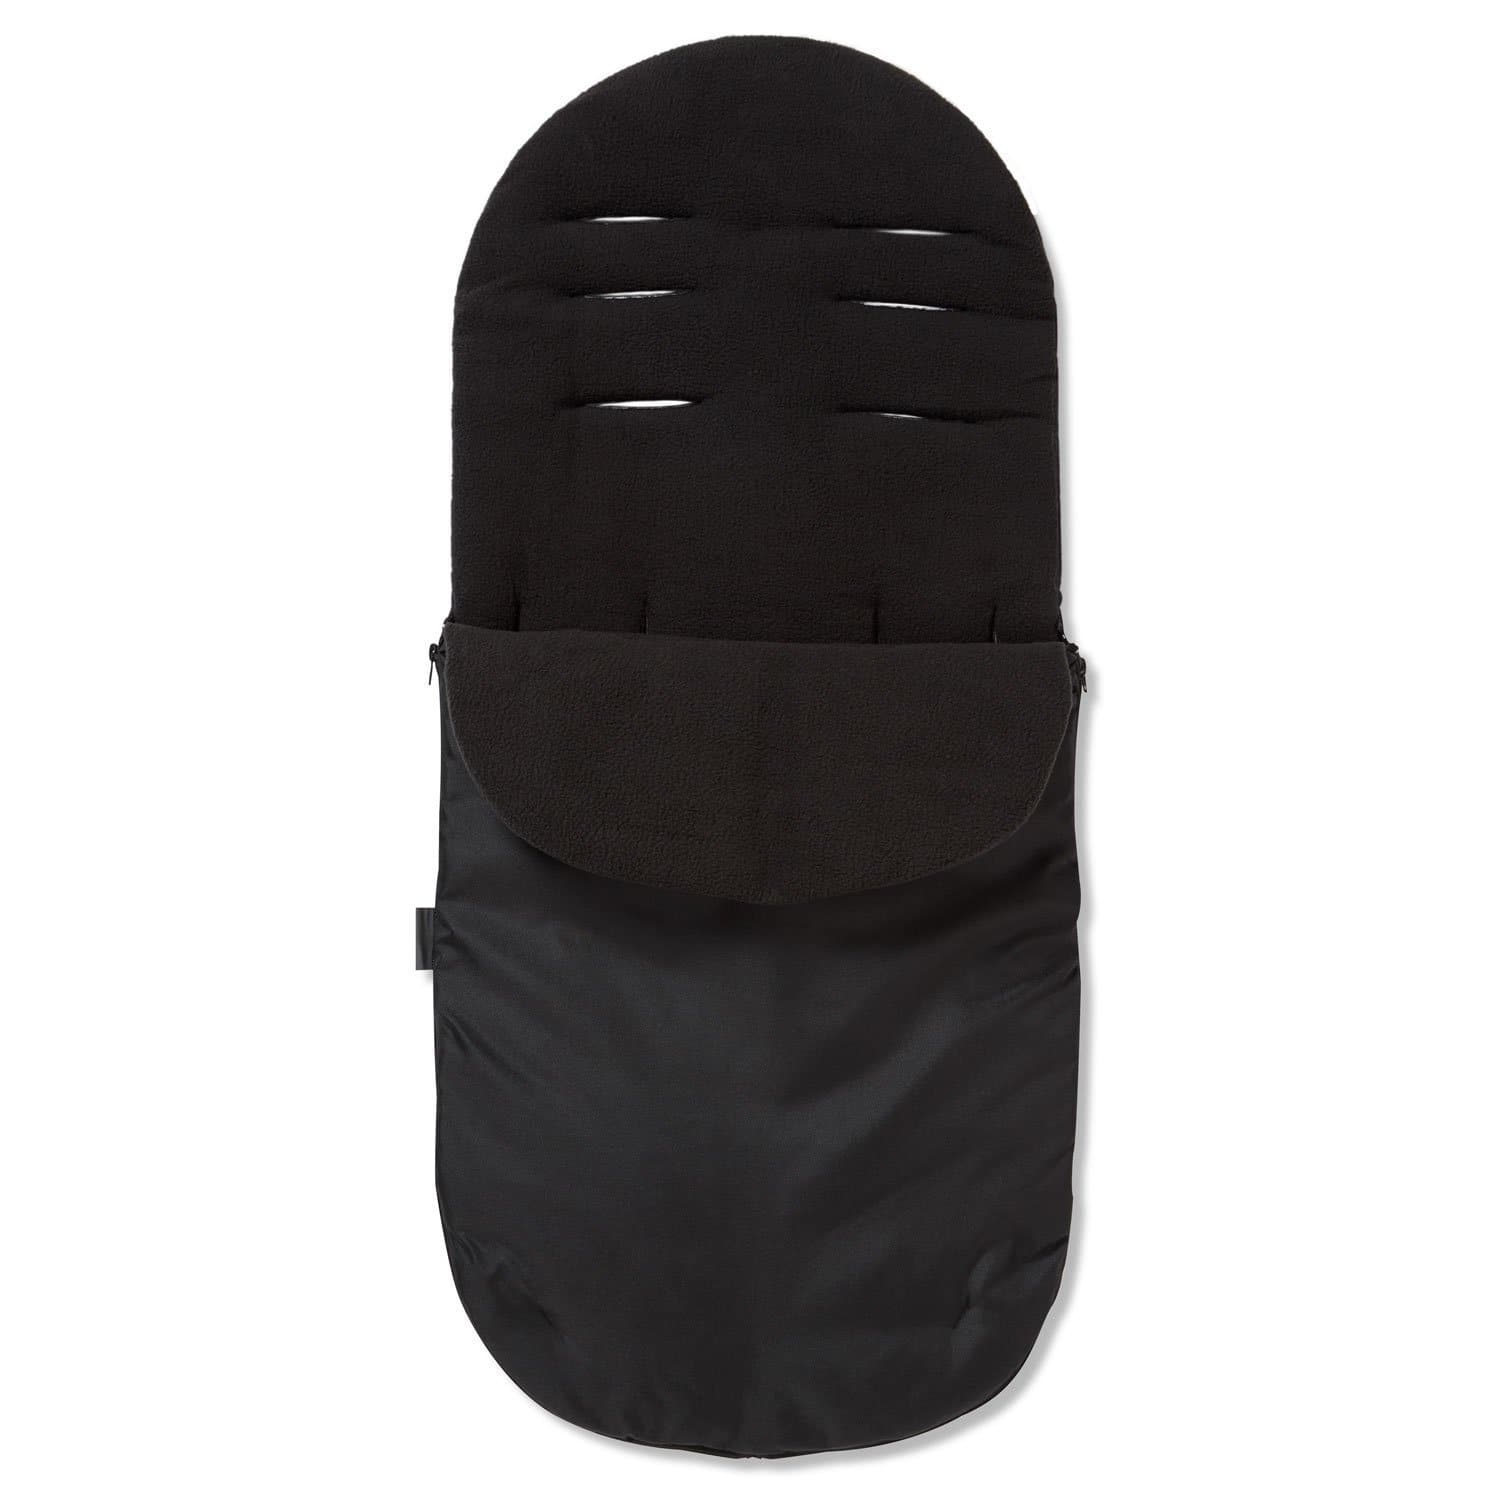 Footmuff / Cosy Toes Compatible with Little Shield - Black / Fits All Models | For Your Little One